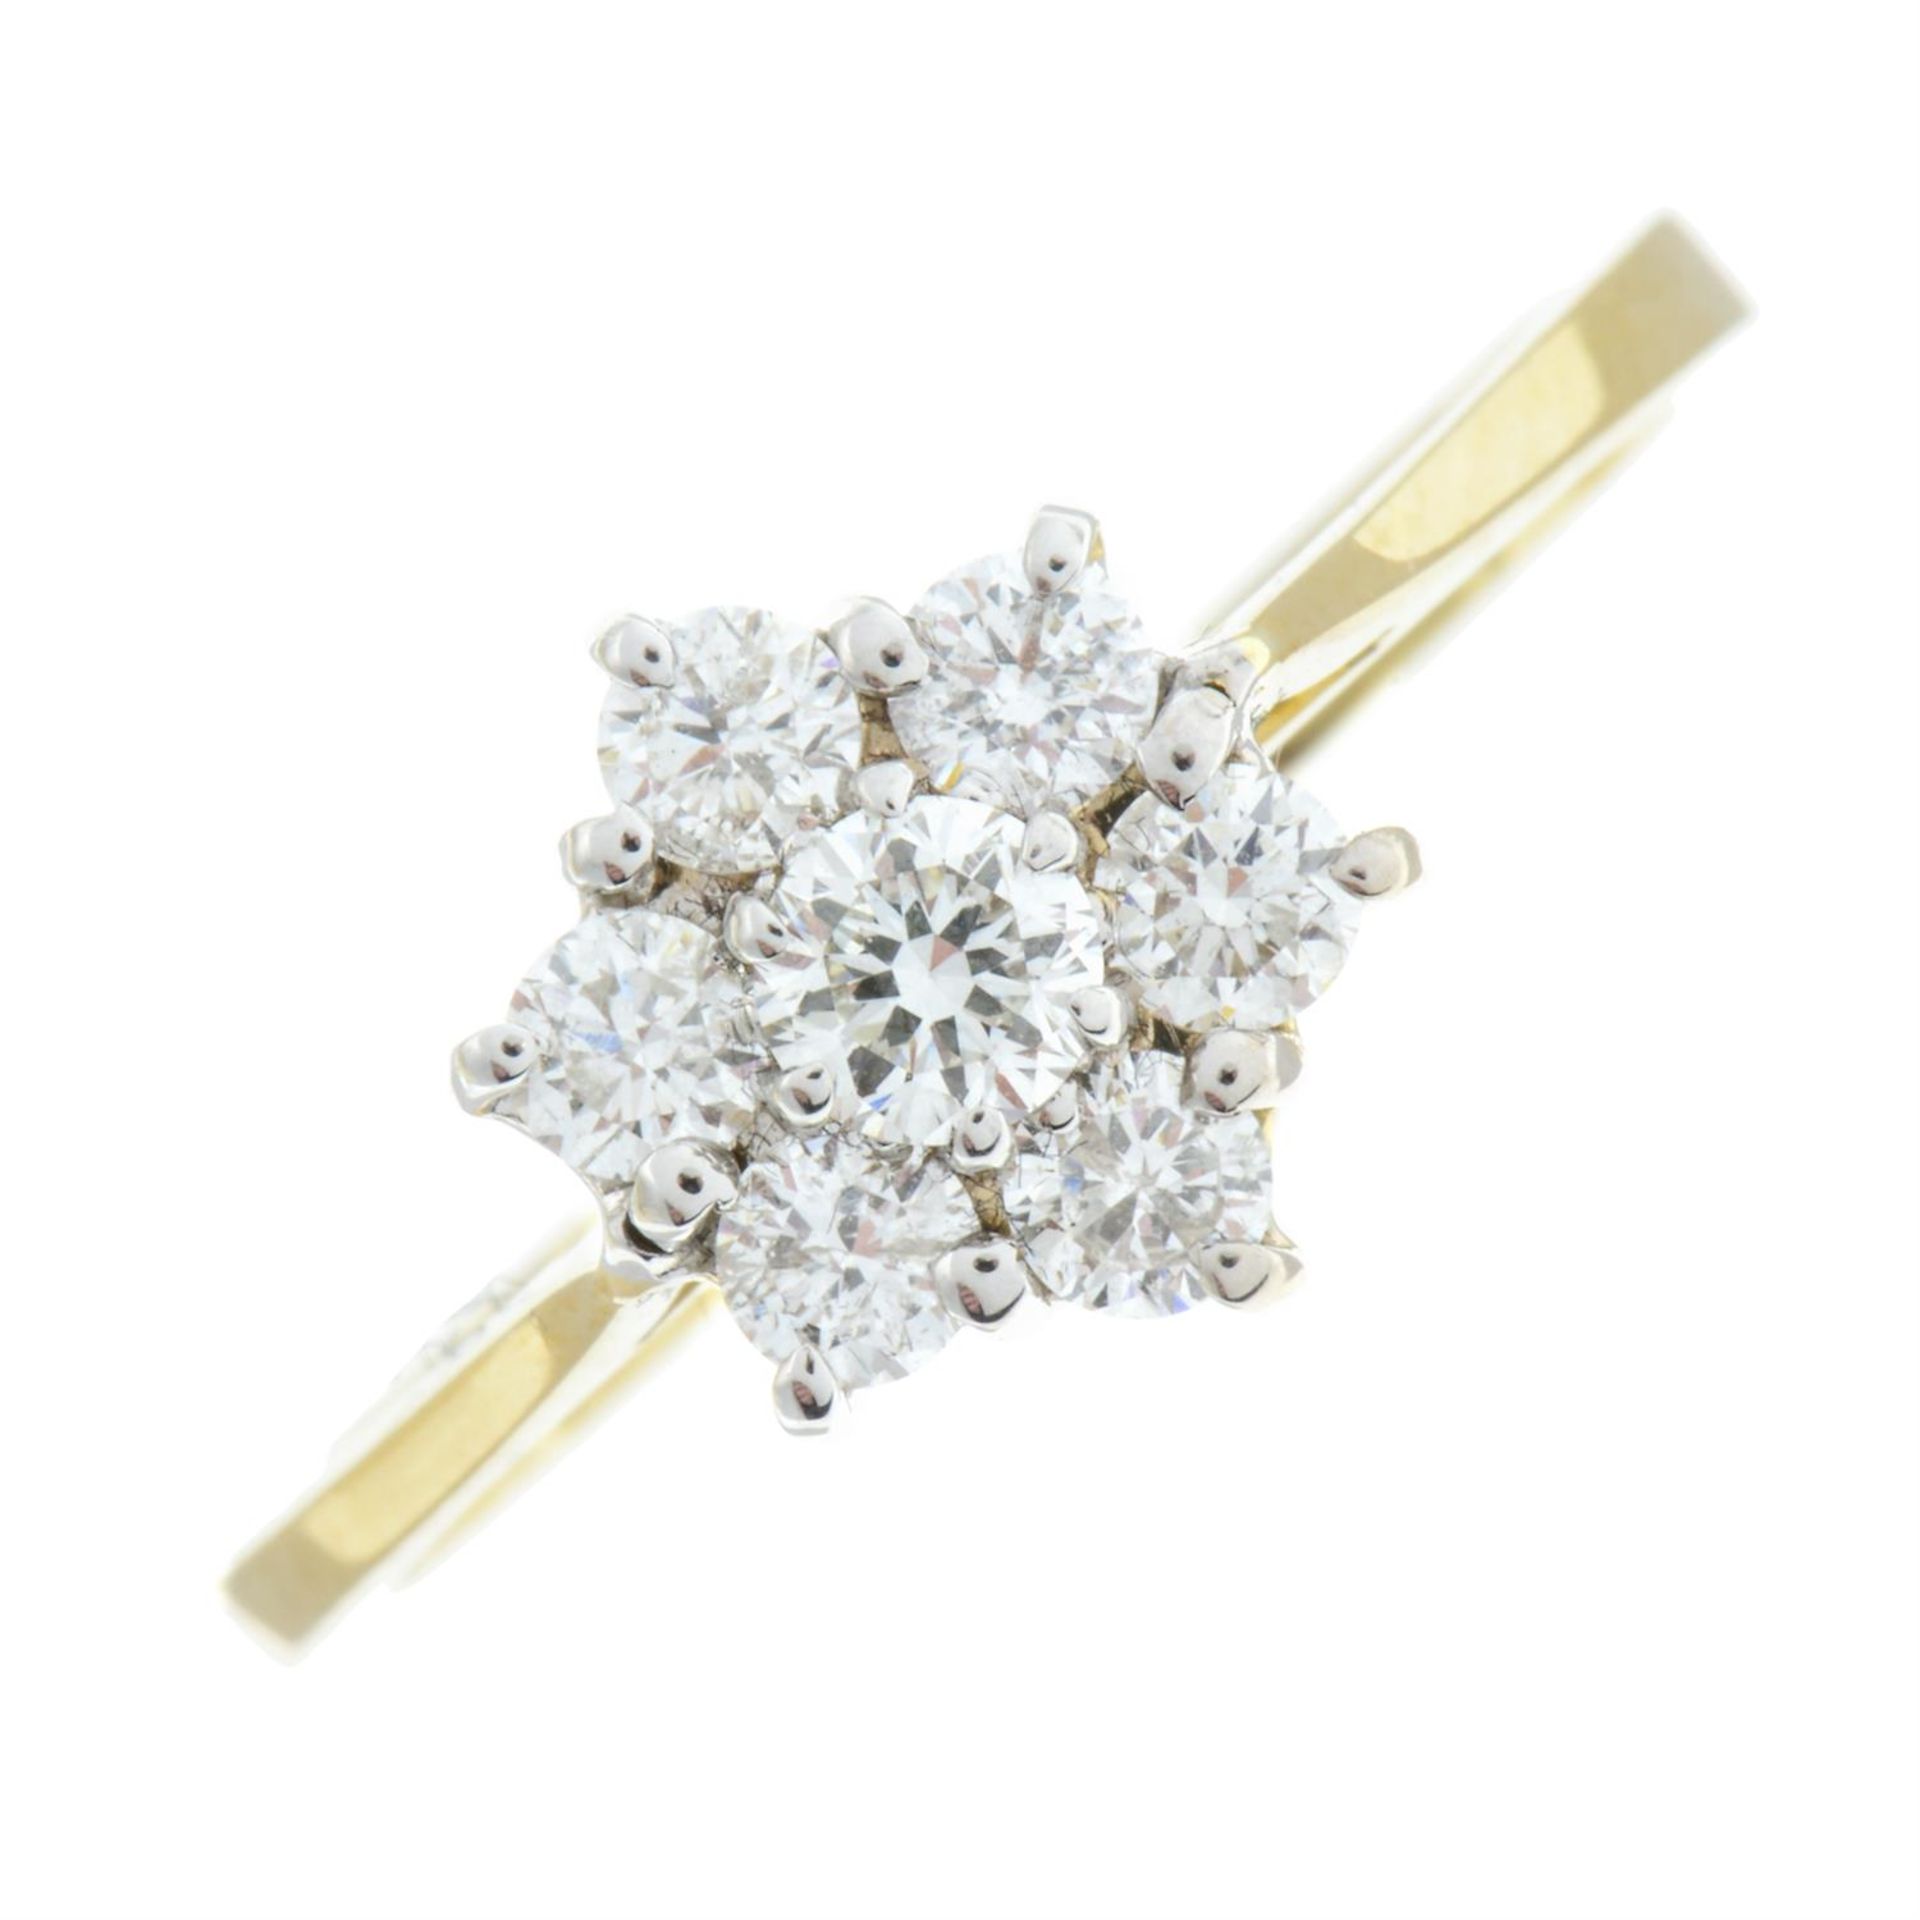 18ct gold diamond cluster ring - Image 2 of 4